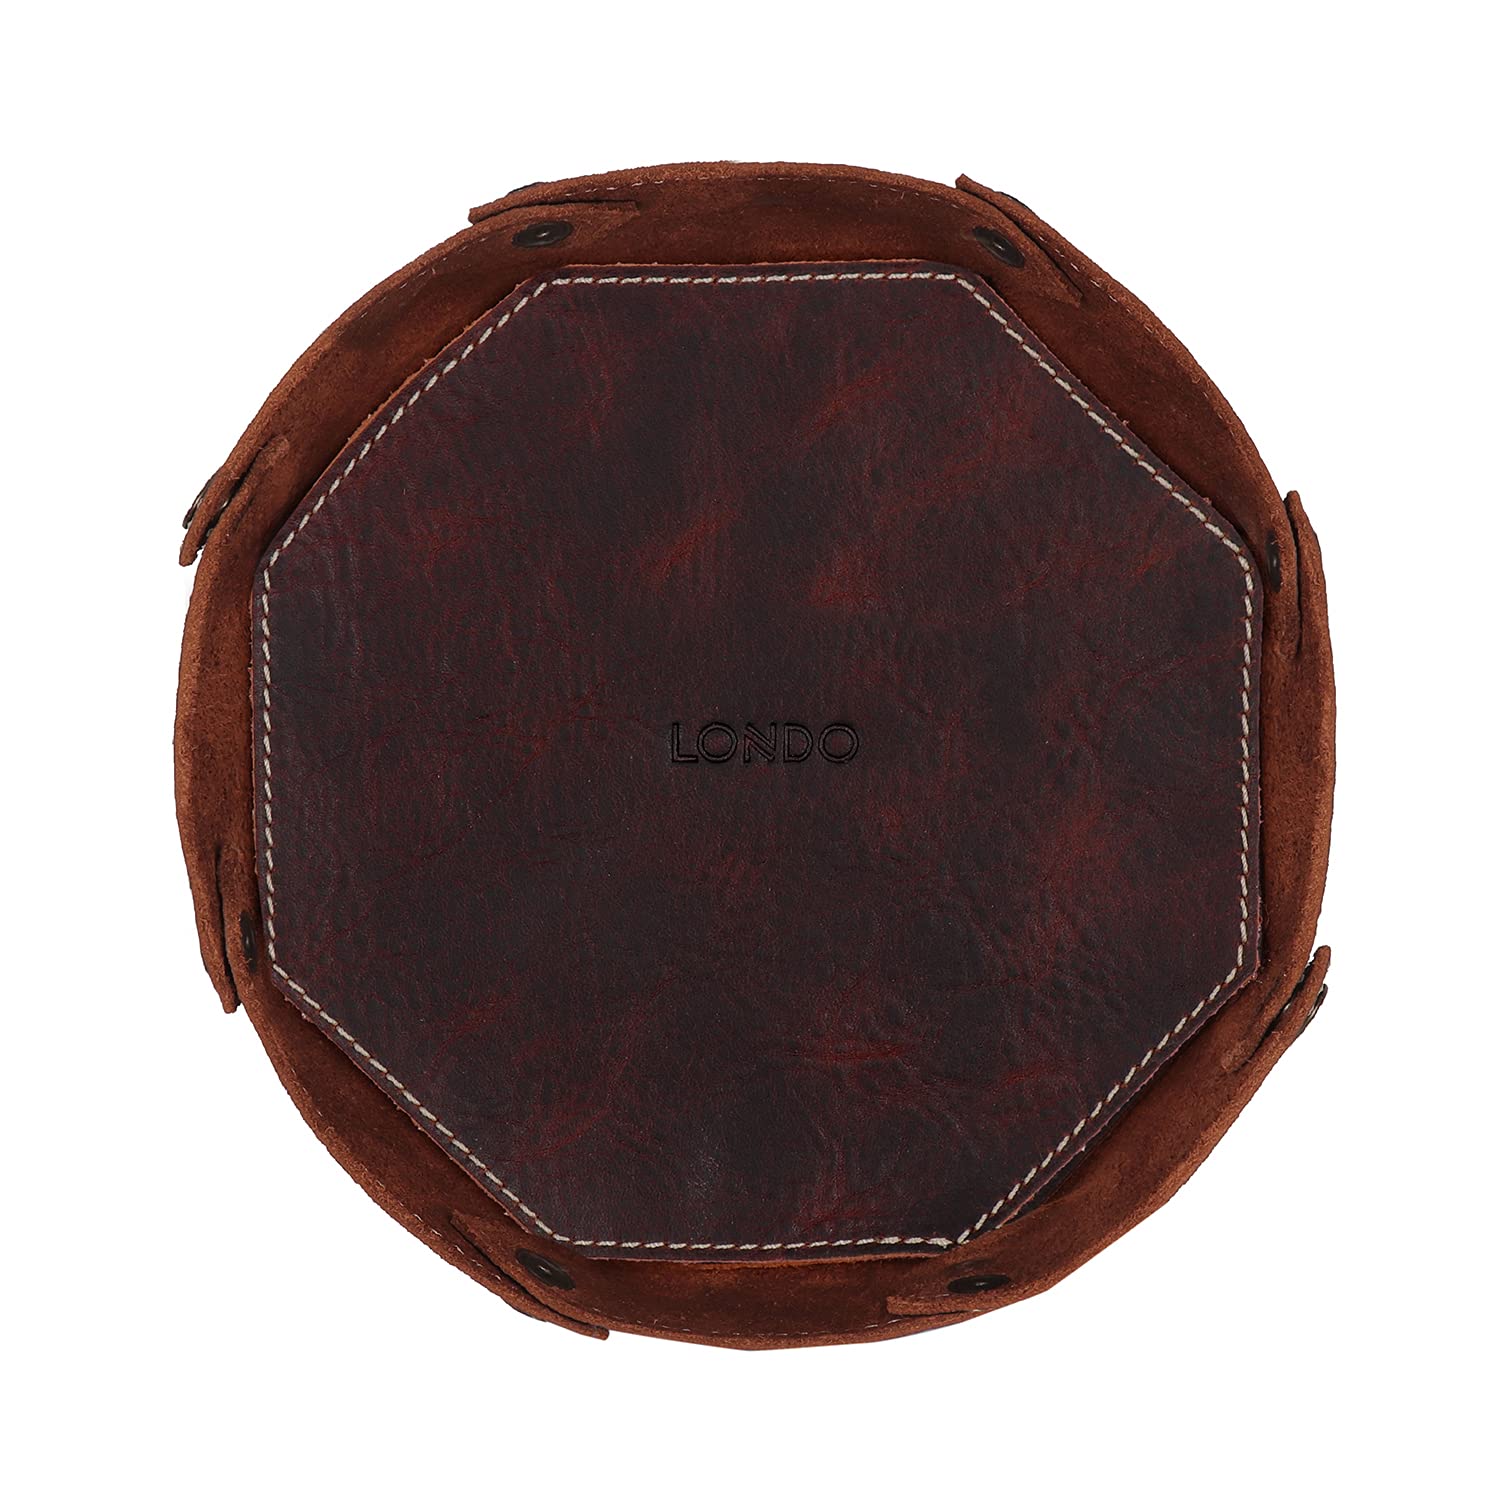 LONDO Genuine Leather Round Tray Organizer - Practical Storage Box for Wallets, Watches, Keys, Coins, Cell Phones and Office Equipment (Brown)